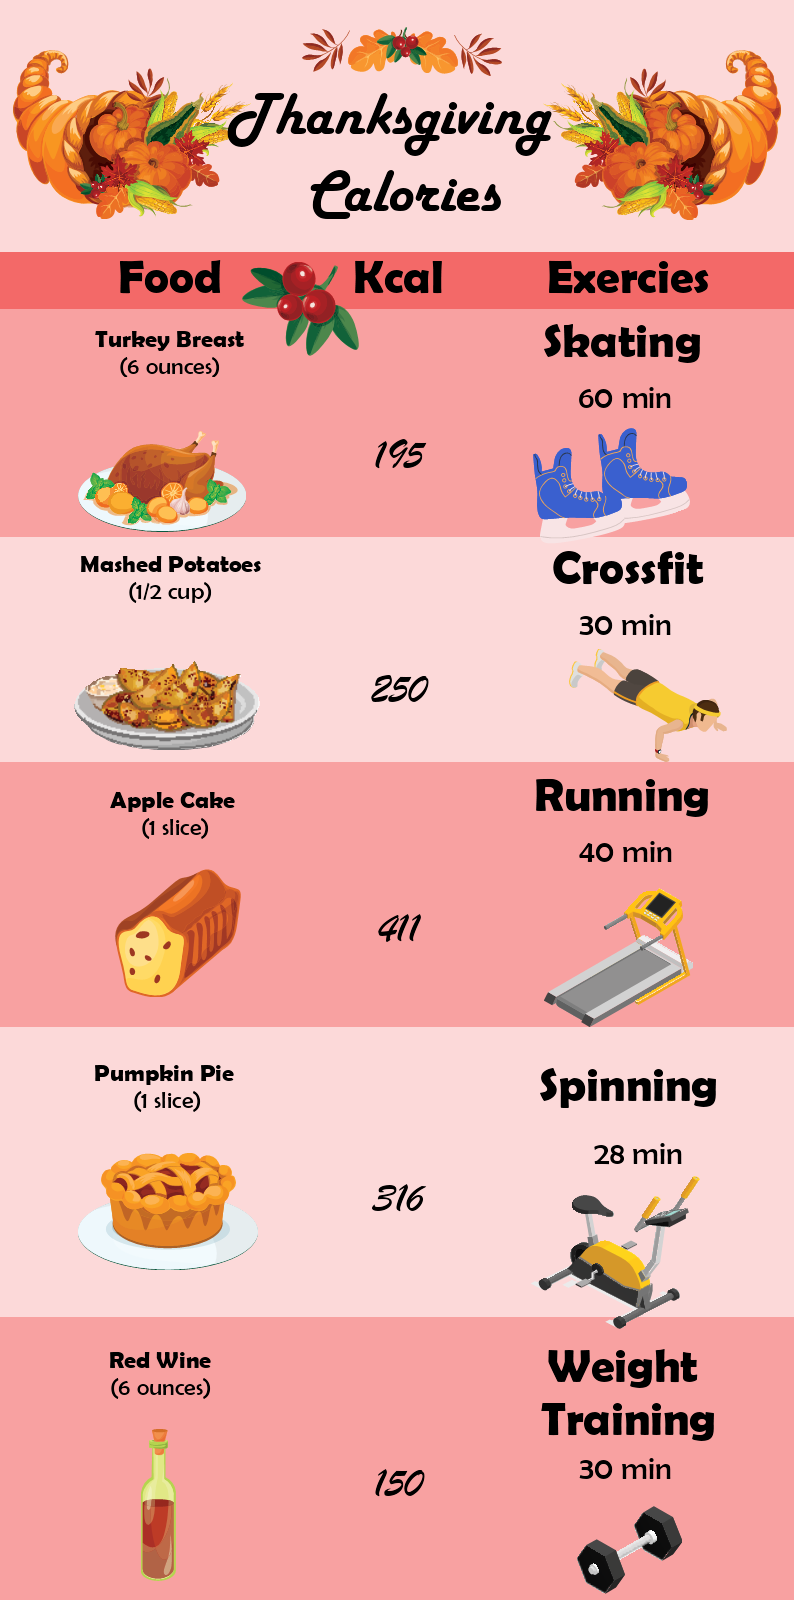 Thanksgiving Calories Infographic Template | MyDraw